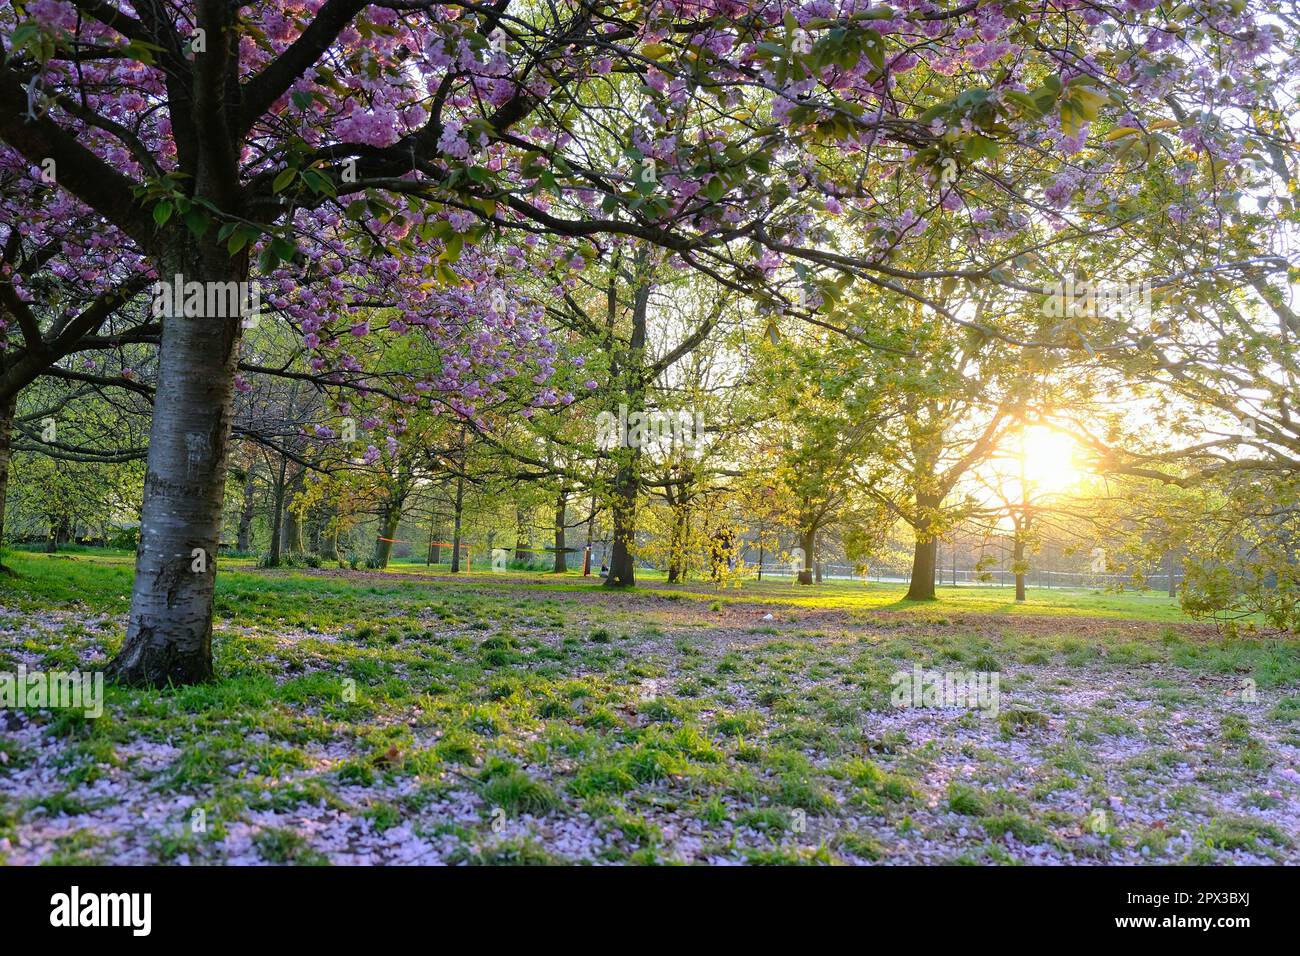 London, UK. Cherry blossom trees in Greenwich Park during early evening Stock Photo